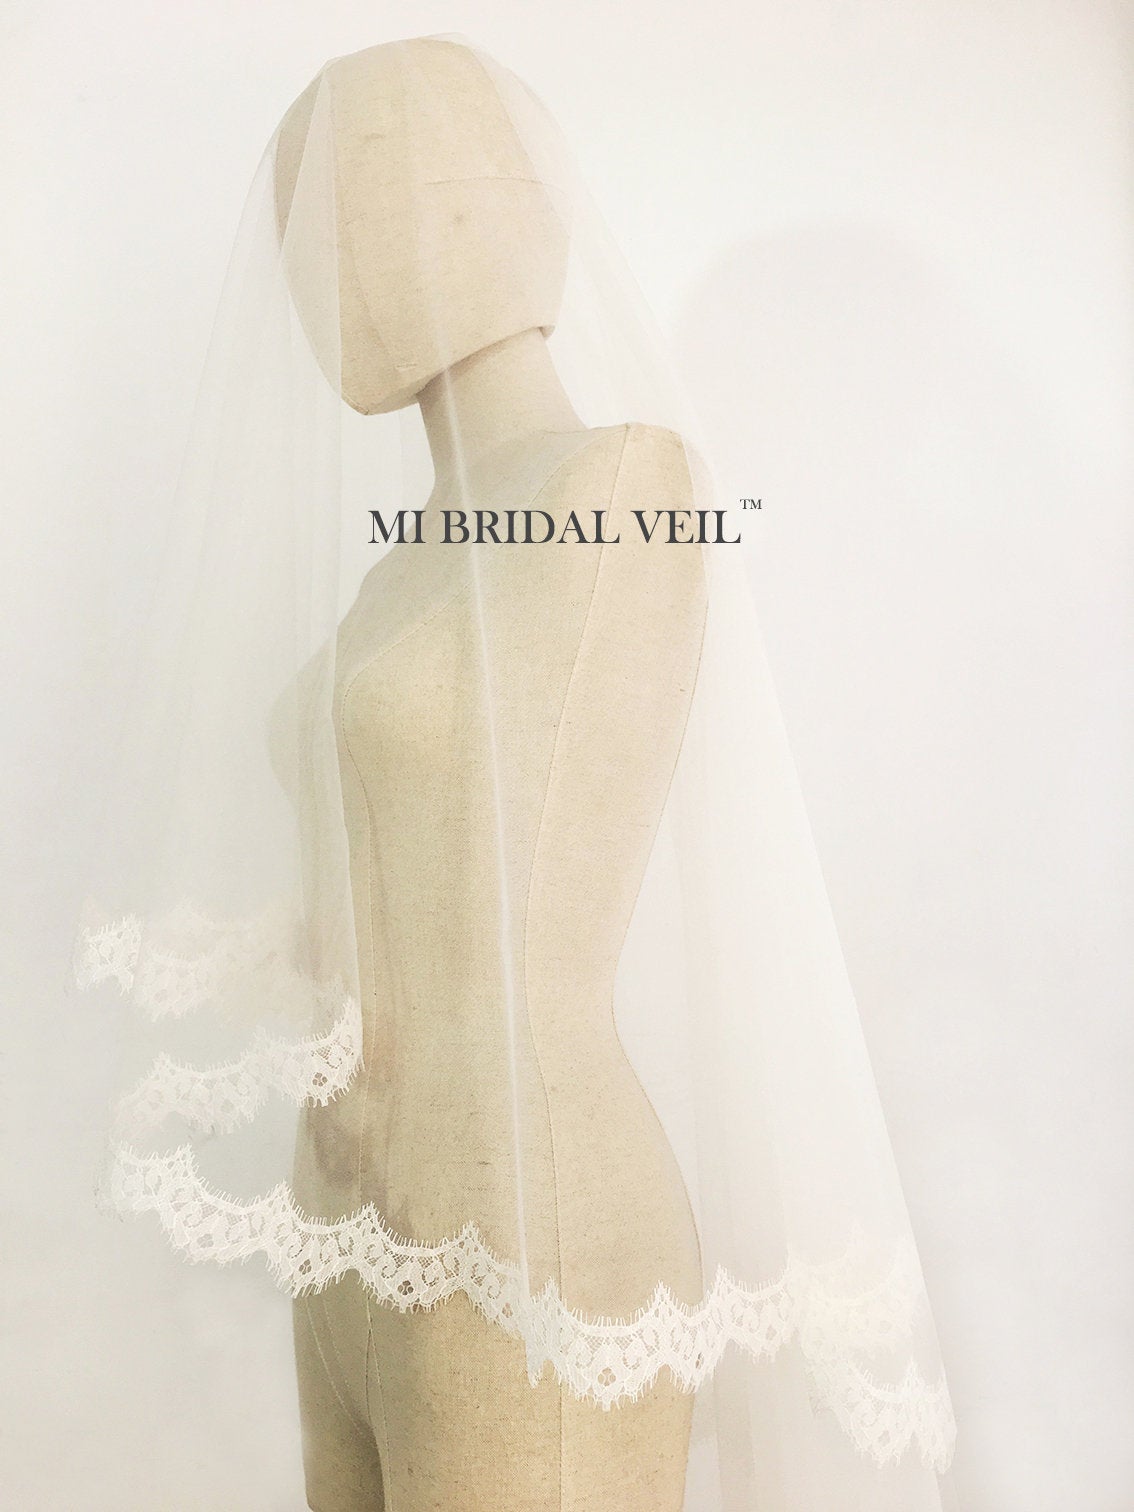 Cathedral Lace Wedding Veil with Blusher, Mantilla Lace Veil, Mi Bridal